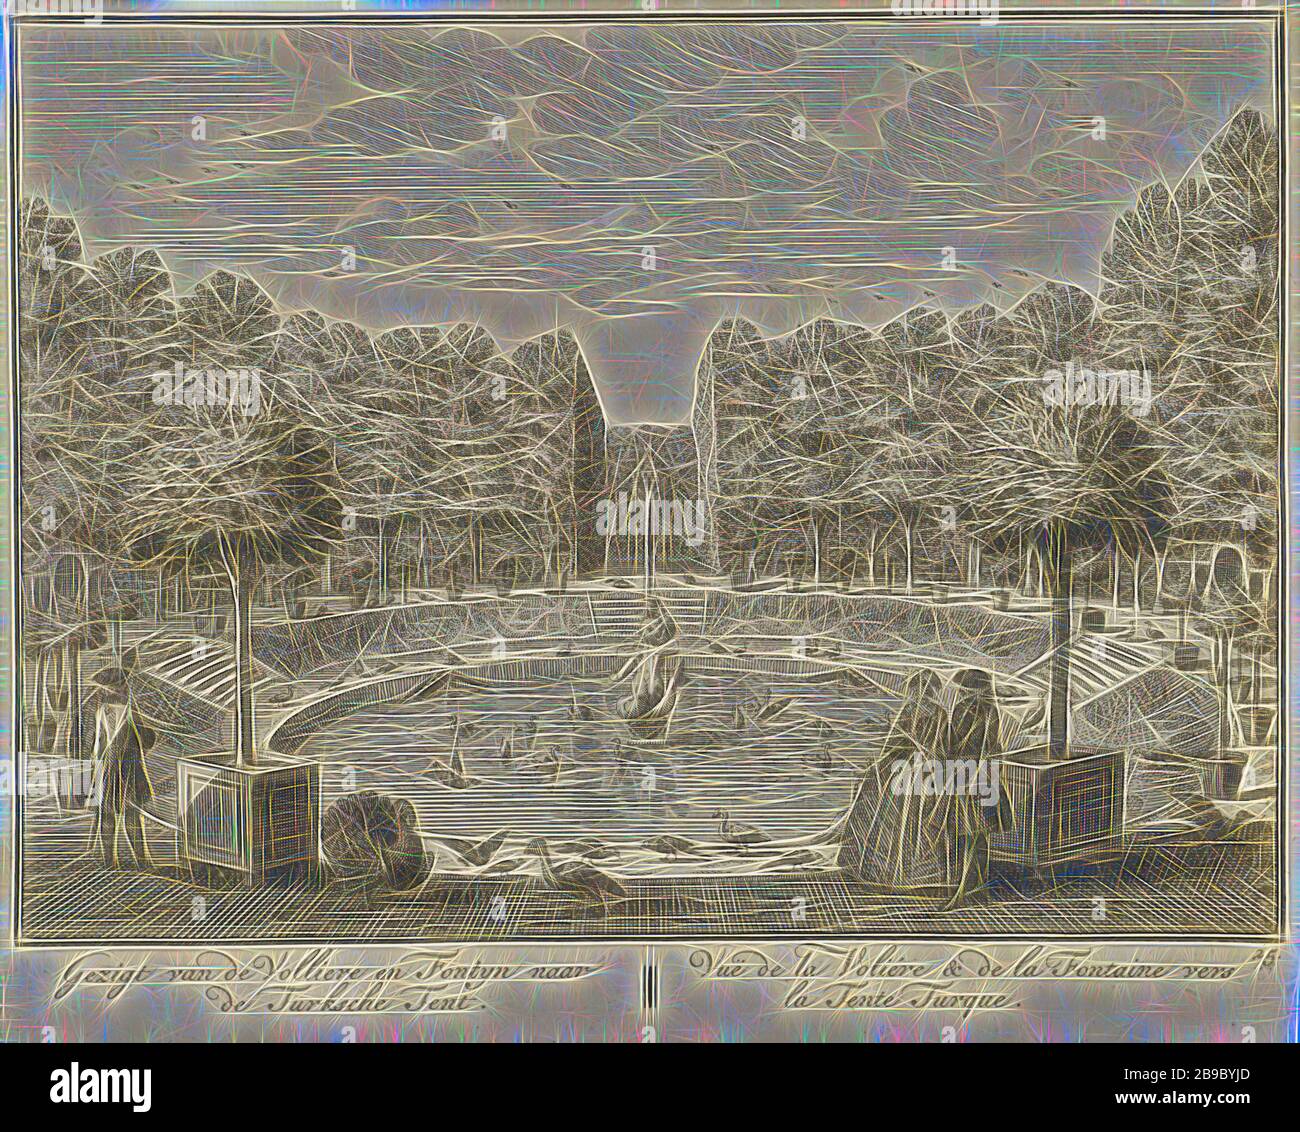 View of the large fountain and the Turkish Tent in the garden of Huis ter Meer in Maarssen Gezigt from the Volliere and Fontyn to the Turkish Tent / Vue de la Volière & de la Fontaine vers la Tente Turque (title on object) The Oud Adelyk huys and Ridderhofstad Ter Meer (series title), View of the large fountain and the Turkish Tent in the French garden of Huis ter Meer. Various birds walk around the fountain. In the foreground are some figures on the edge of the basin. The print is part of a series with 26 faces on Huis ter Meer and the accompanying estate in Maarssen, country house, French or Stock Photo